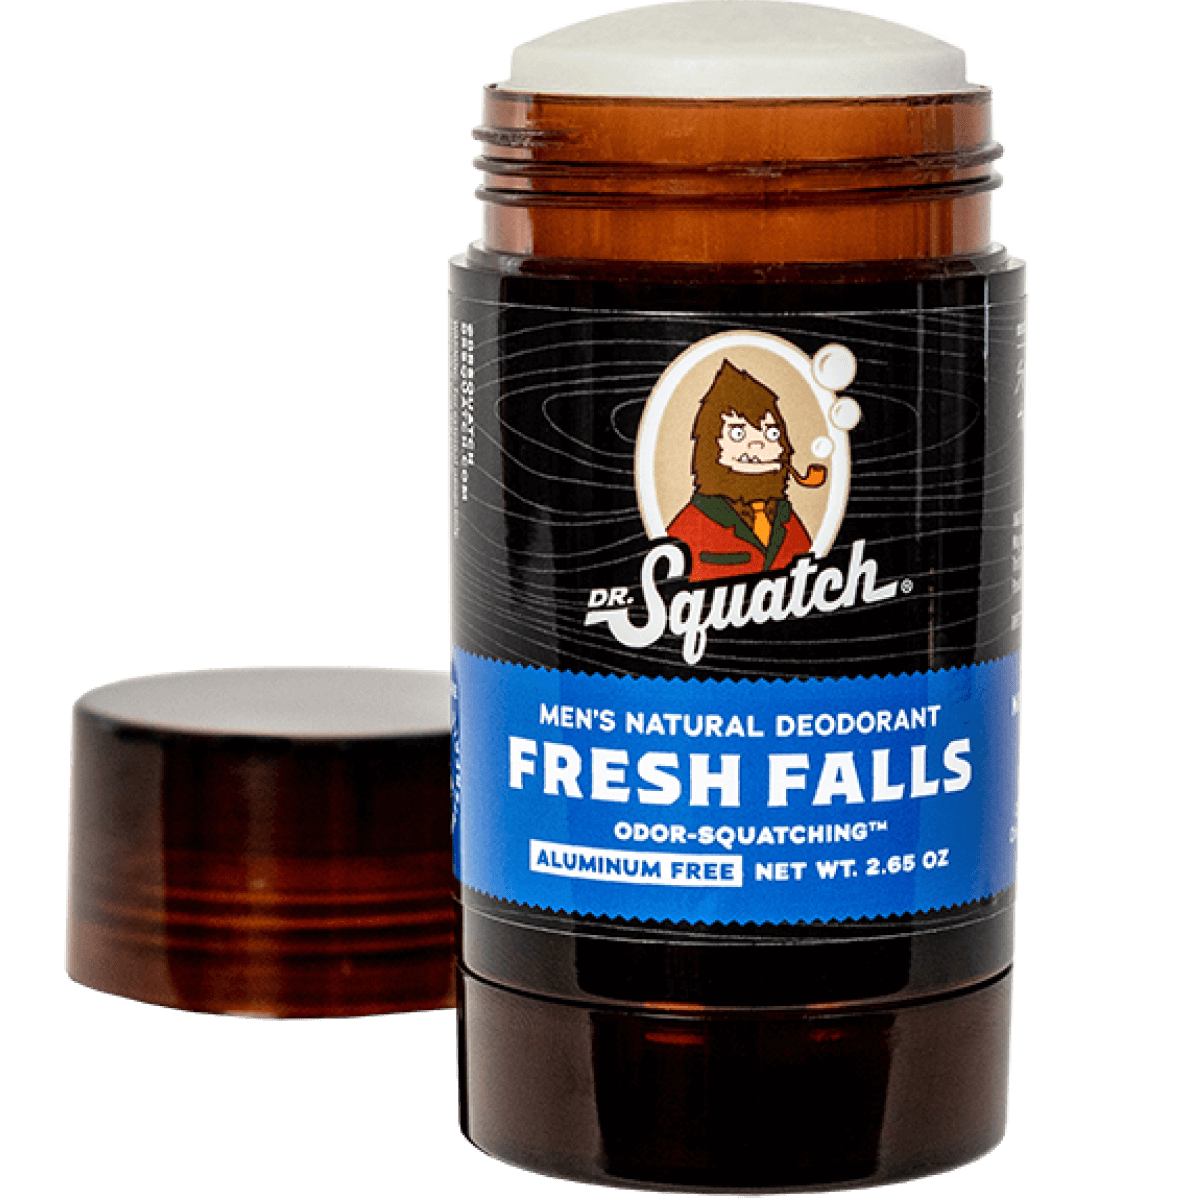 Dr. Squatch's Fresh Falls and Deodorant Bundle Review/Reaction 